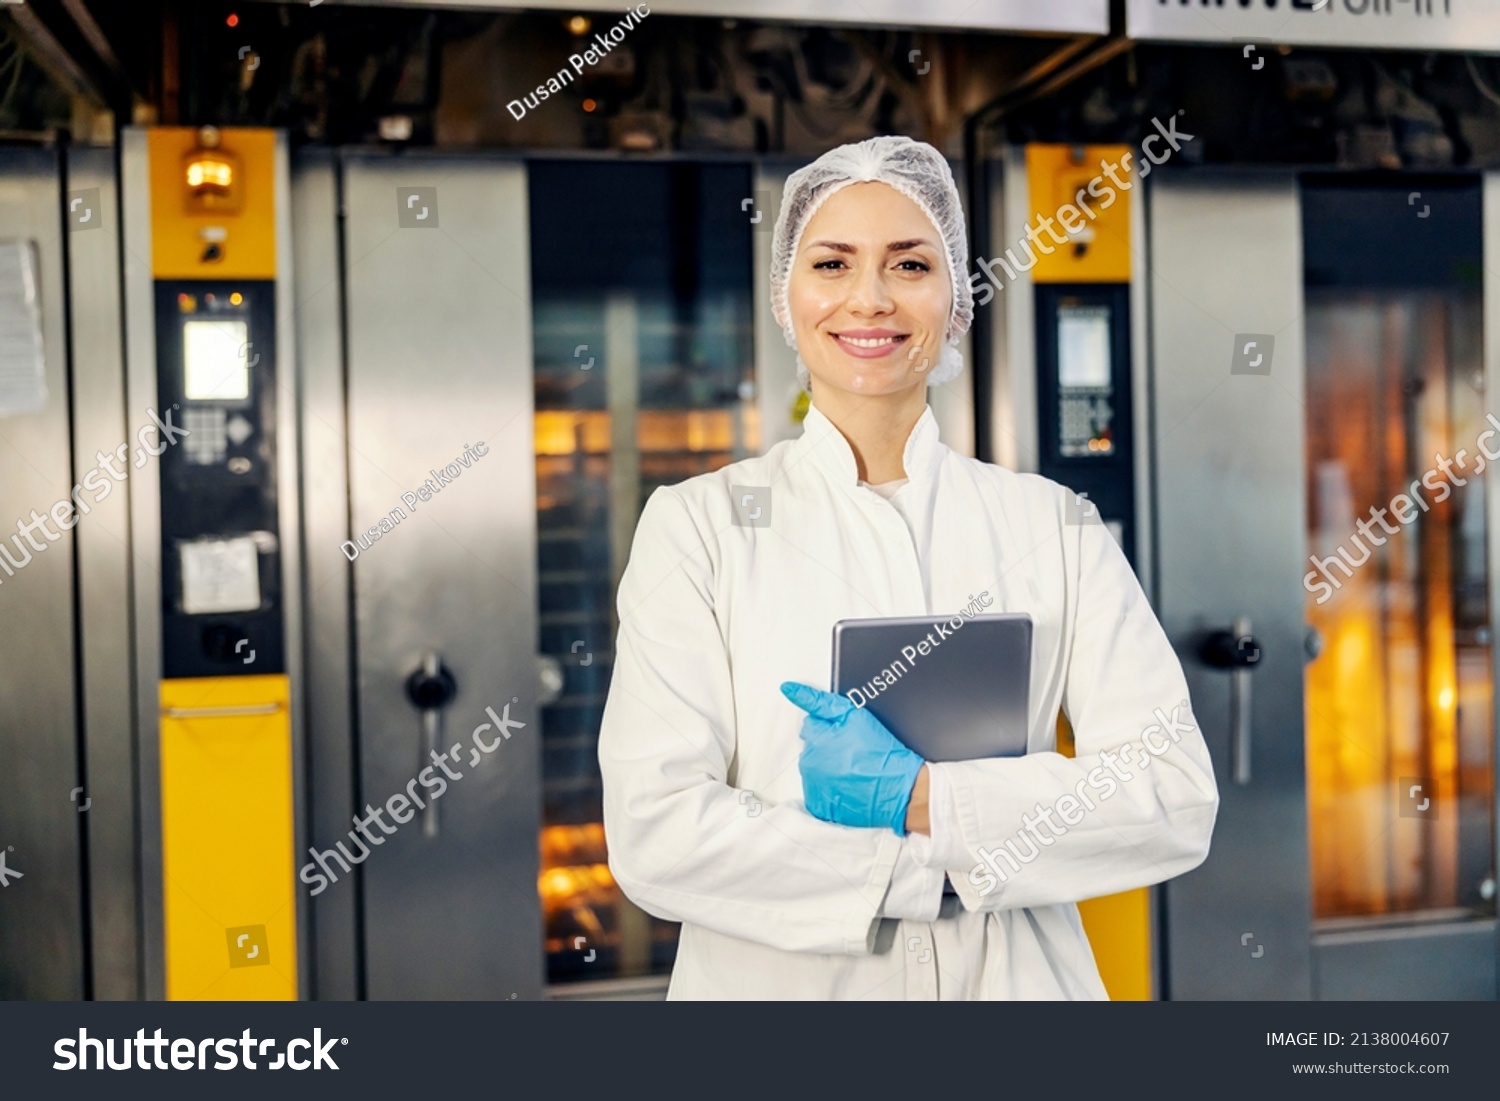 A smiling female food factory inspector with tablet in hands standing in front of ovens in bakery. #2138004607